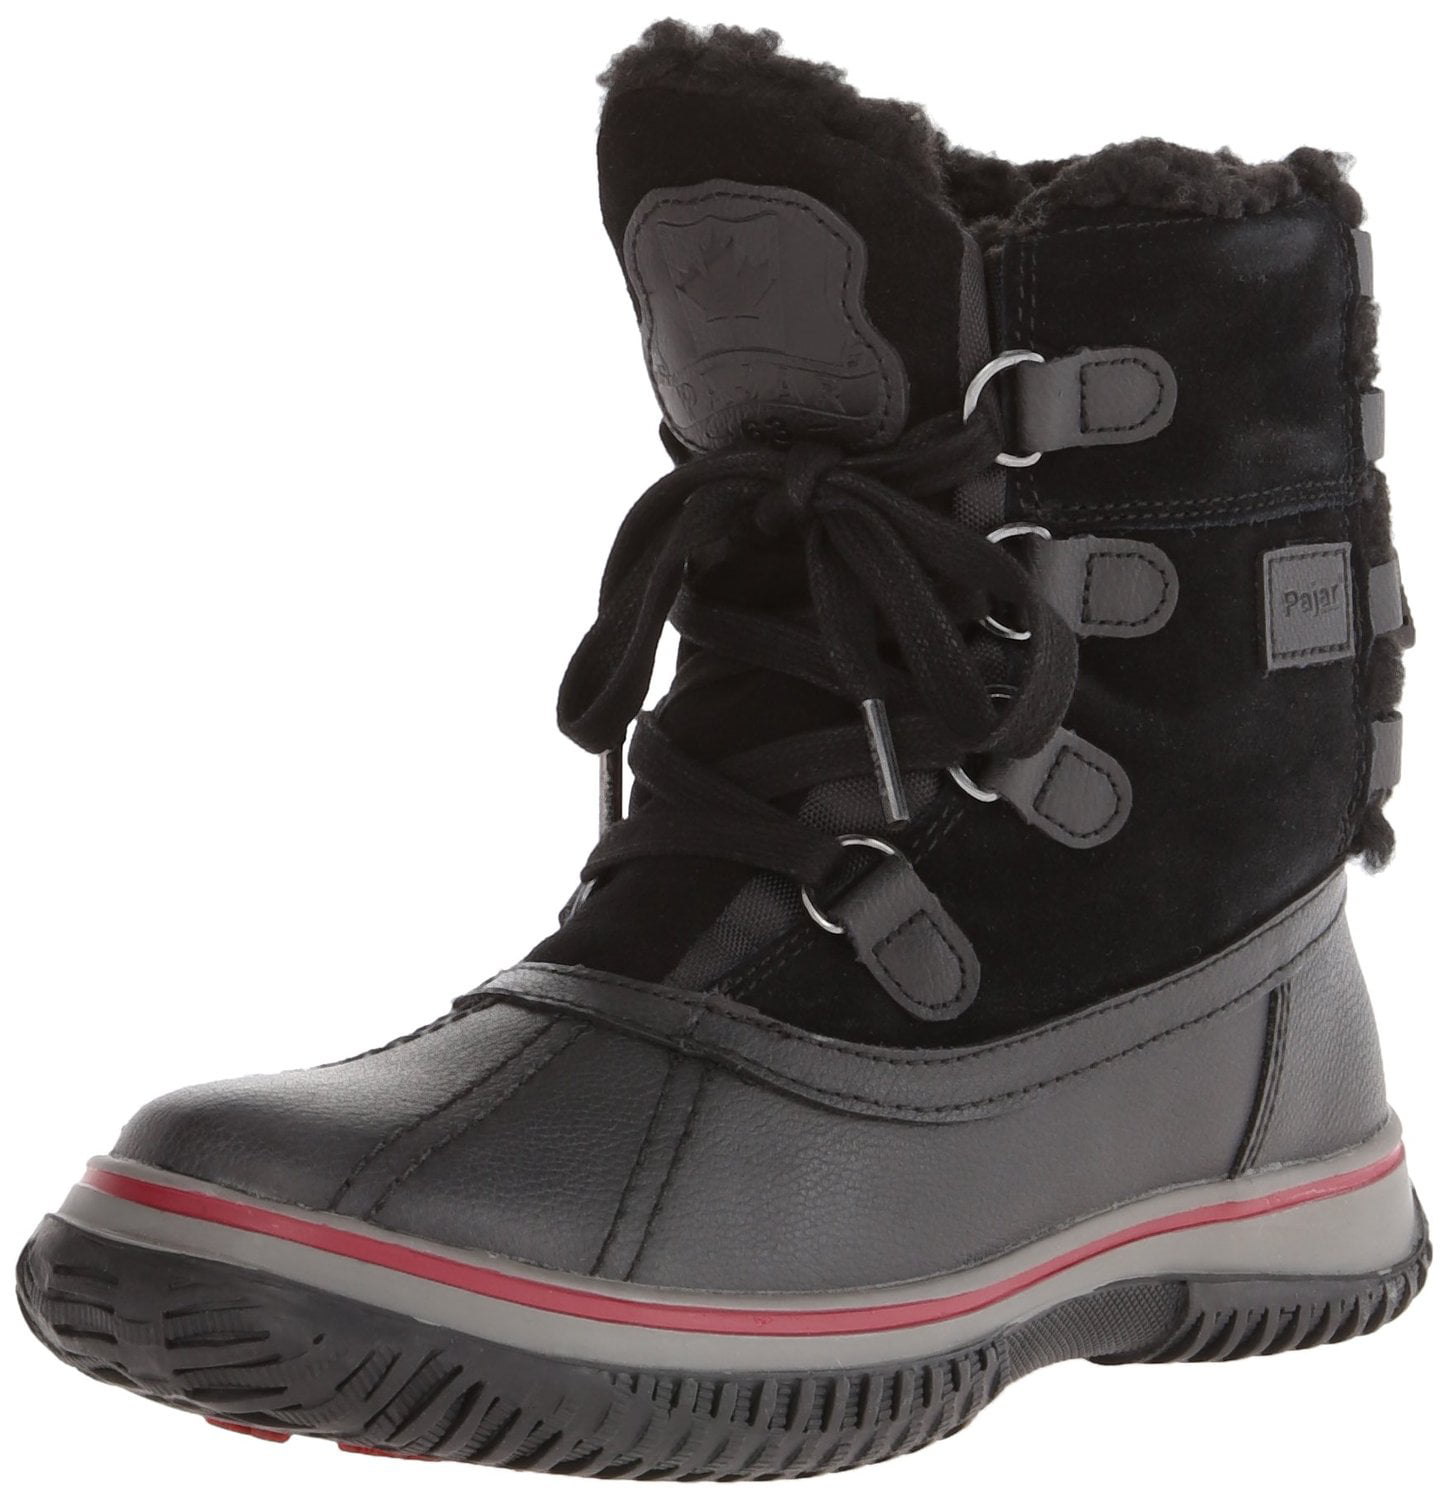 Pajar of Canada Iceland Boot 